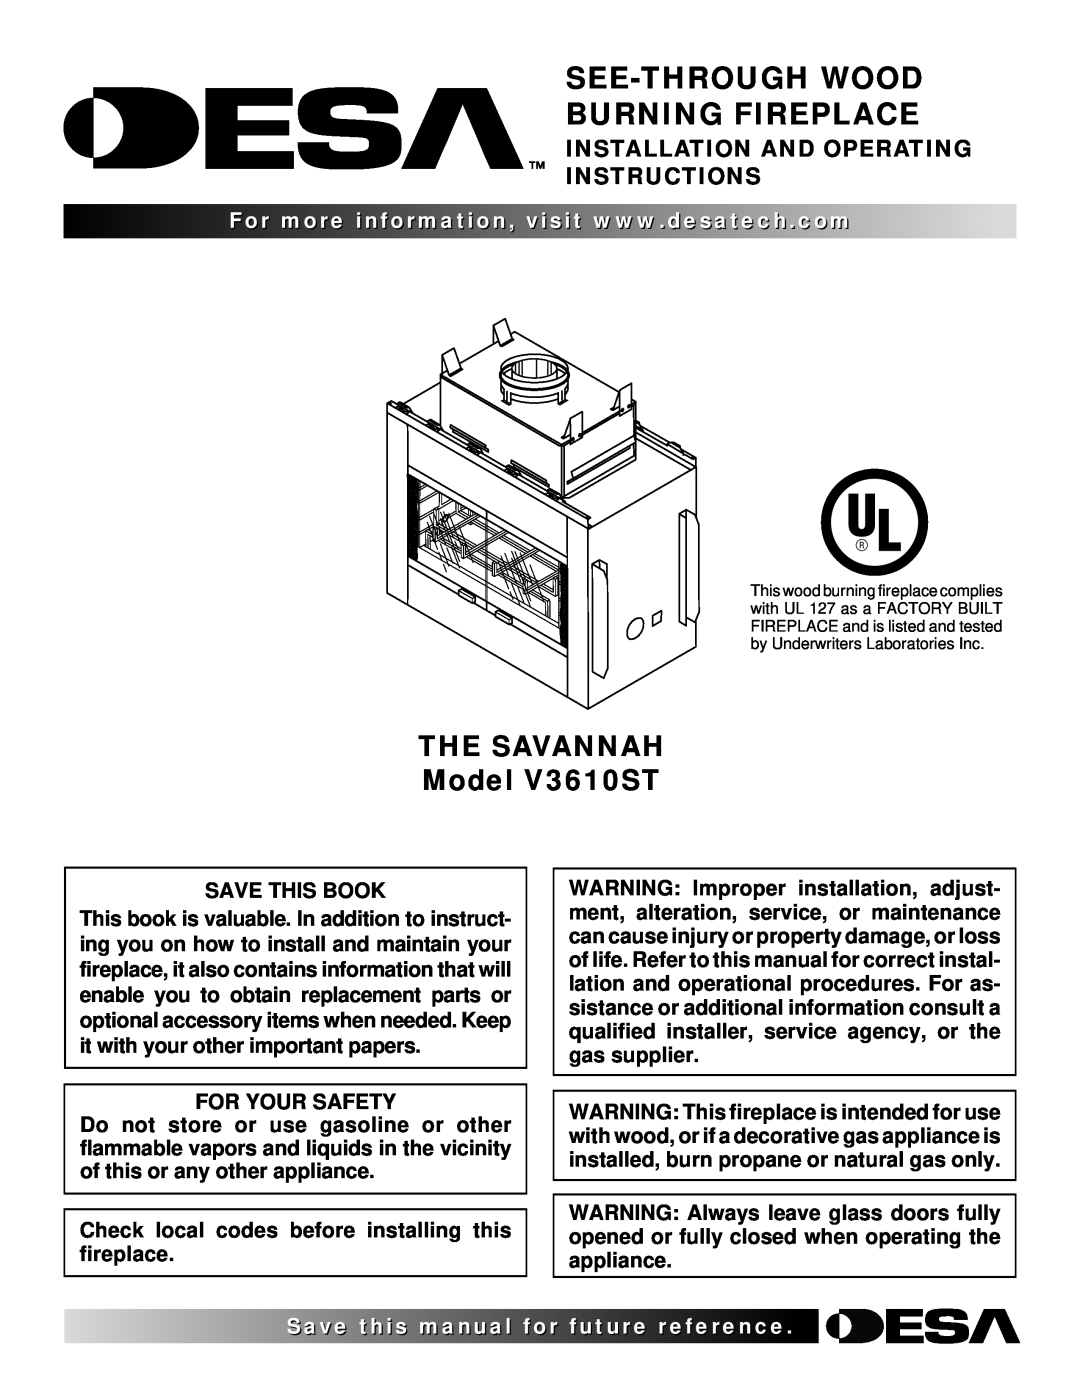 Desa manual THE SAVANNAH Model V3610ST, See-Throughwood Burning Fireplace, Installation And Operating Instructions 